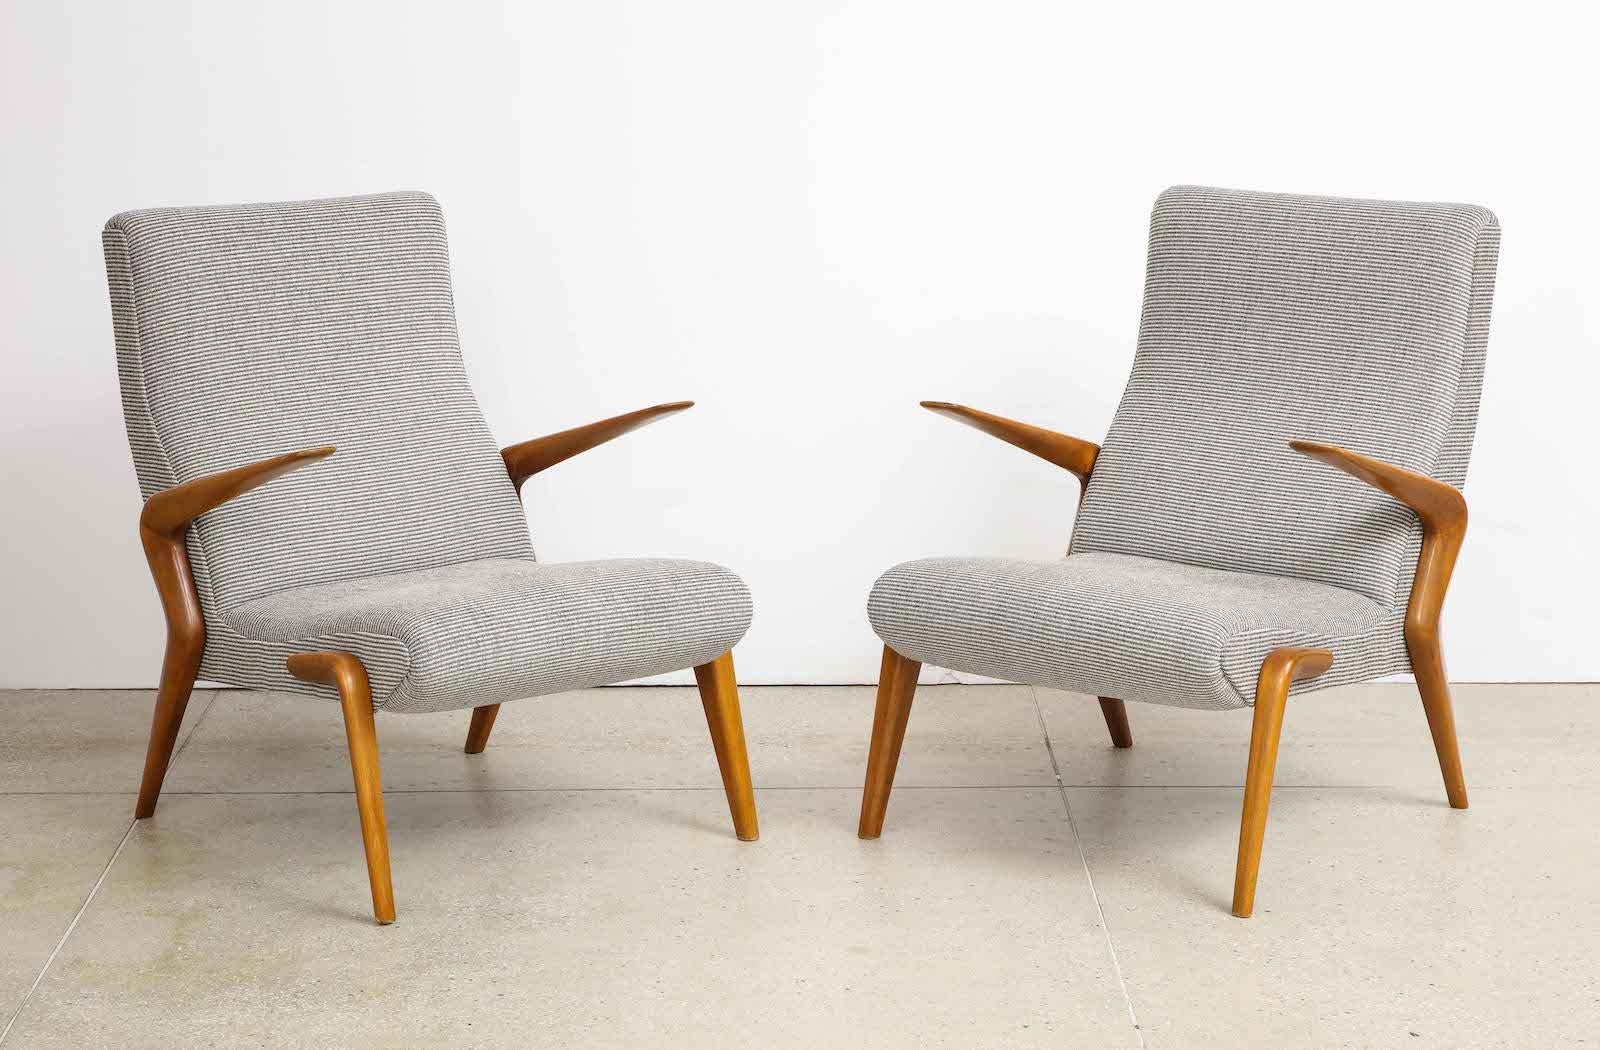 P71 Lounge Chairs by Osvaldo Borsani for Tecno. Opern arm lounge chairs of bleached walnut and upholstered seat and back. Wood has recently been refinished and newly upholstered seats. 
Provenance: Private Collection Bergamo
Published: Osvaldo